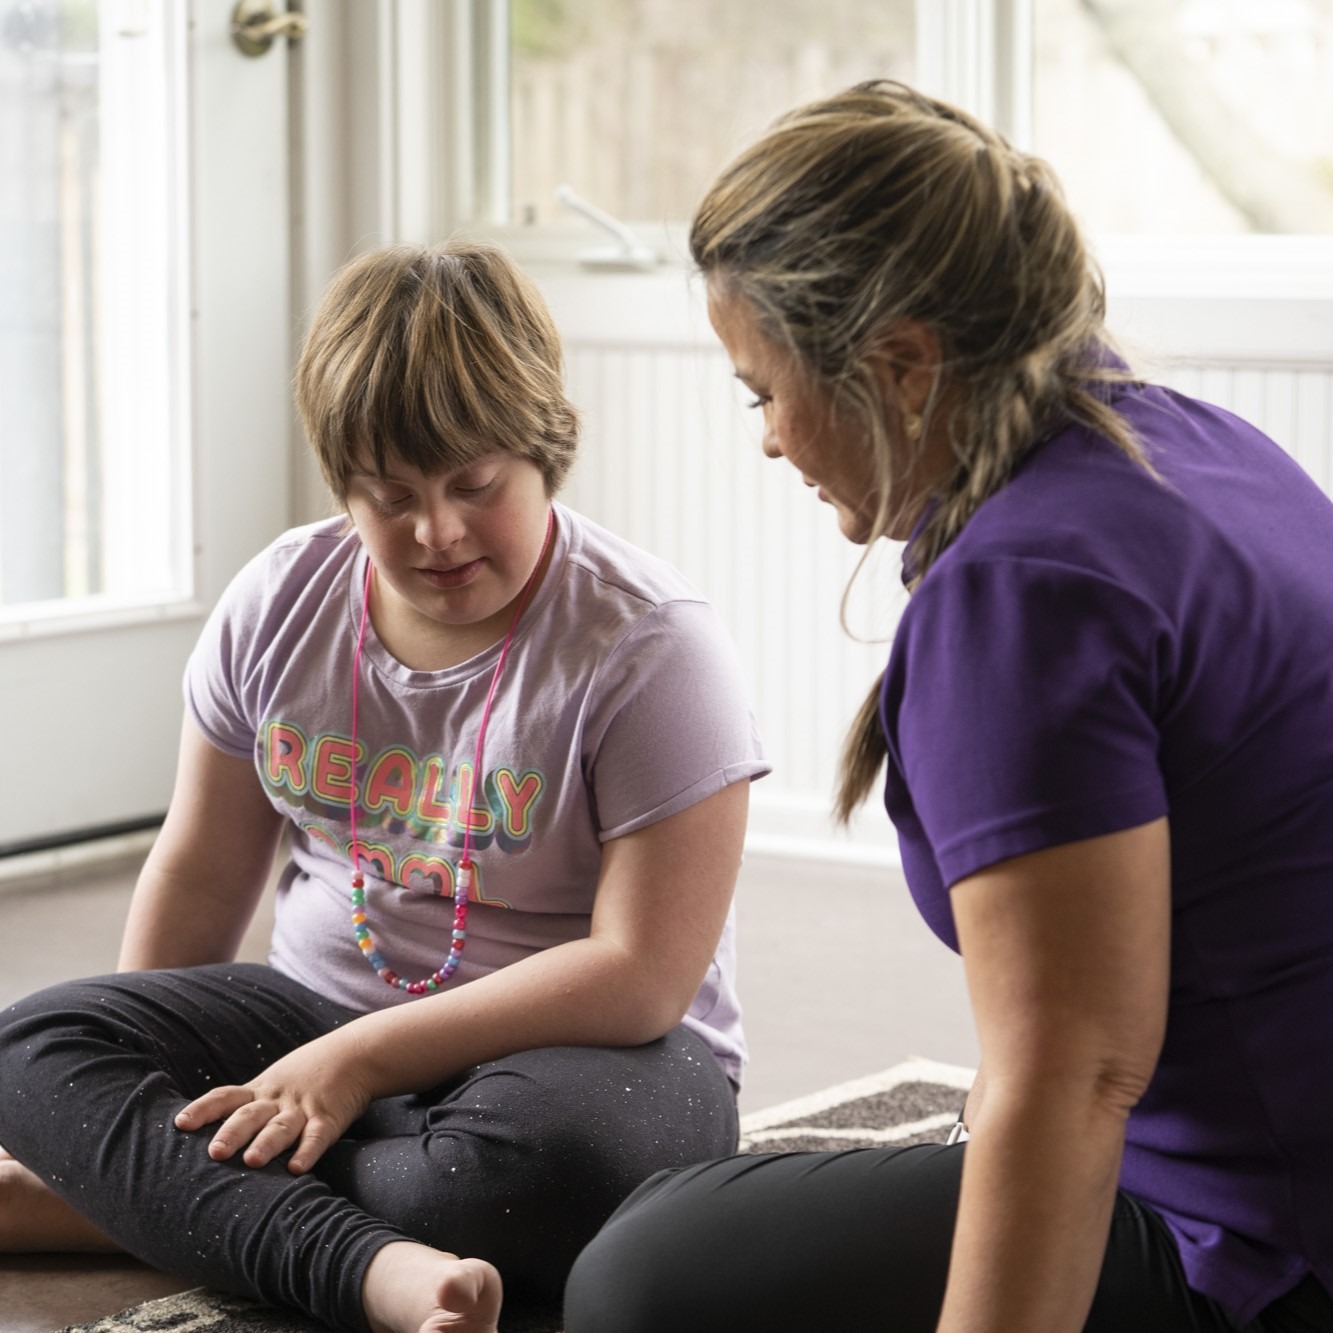 A young girl with Down syndrome sitting on the floor engaging in an activity with an adult woman.